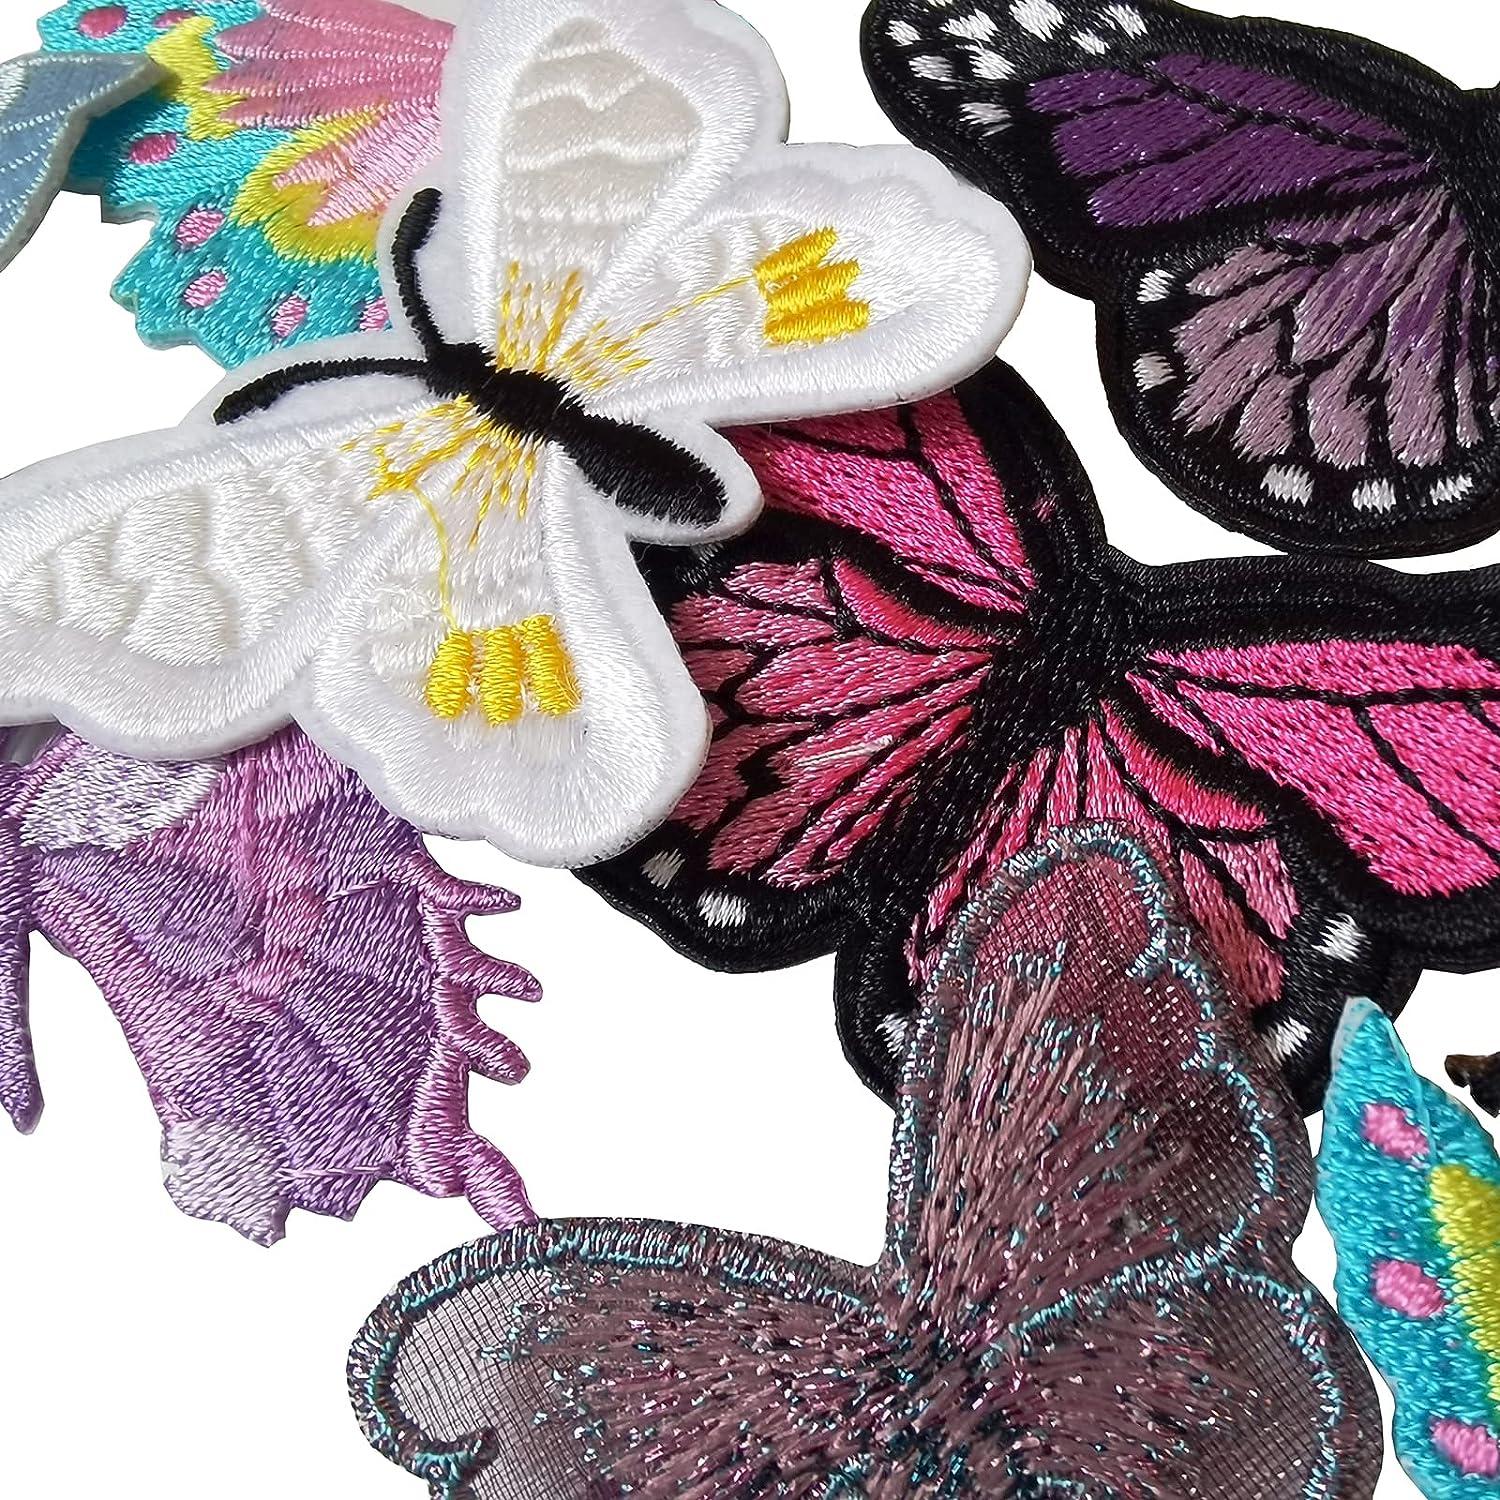 Cooll 10pcs Butterfly Appliques Exquisite Handicraft Double Layers DIY Embroidery Butterfly Patches Craft Flower Accessories, Purple